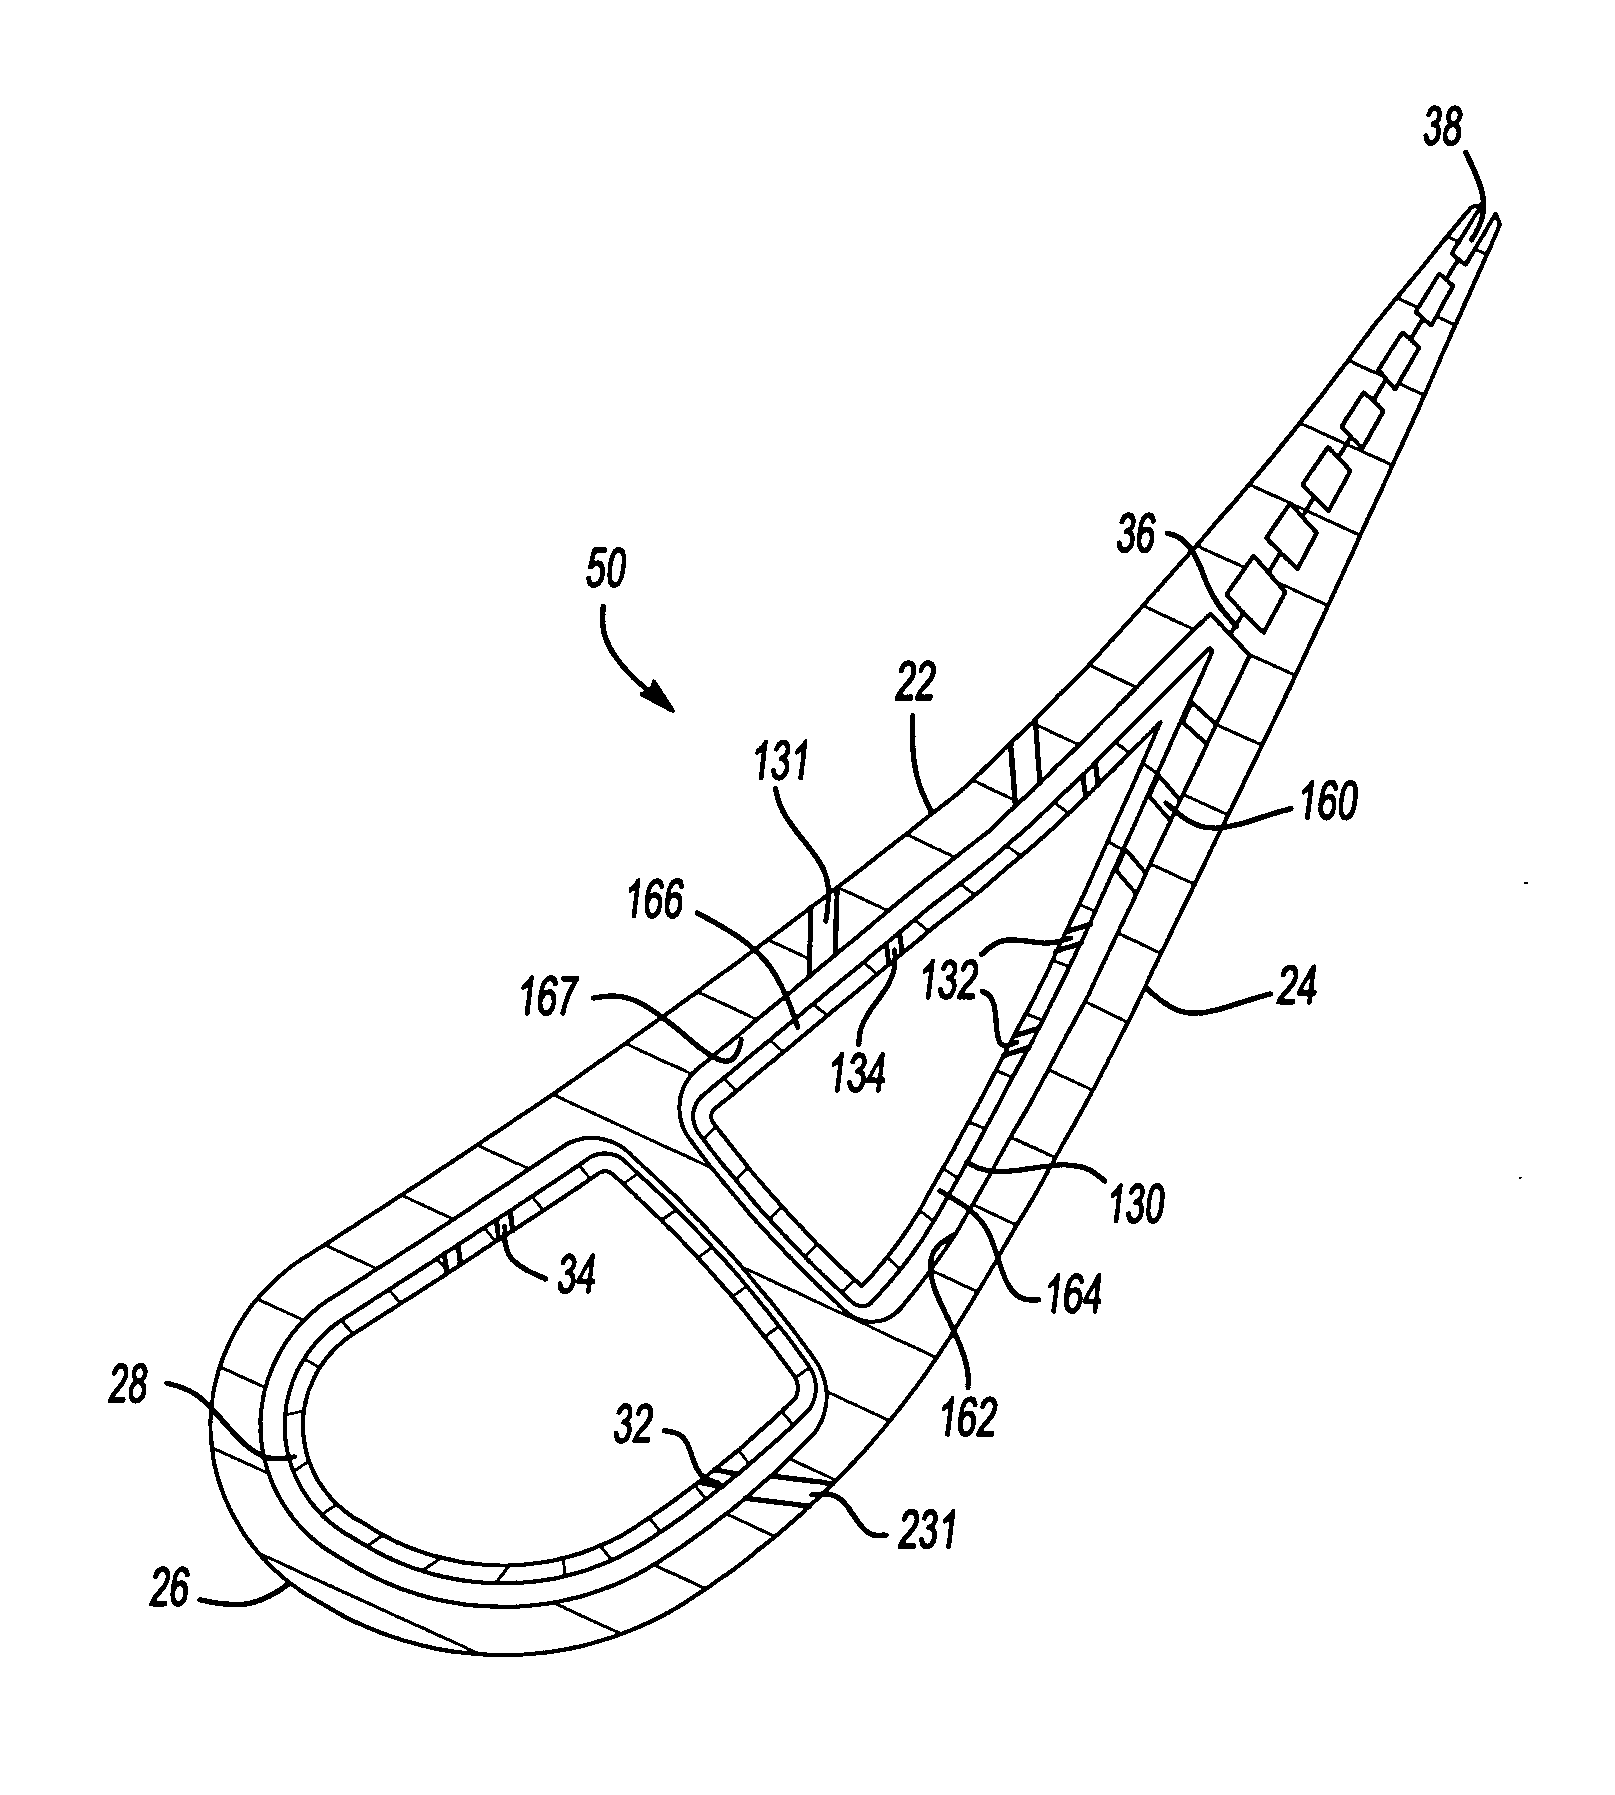 Gas turbine engine component suction side trailing edge cooling scheme